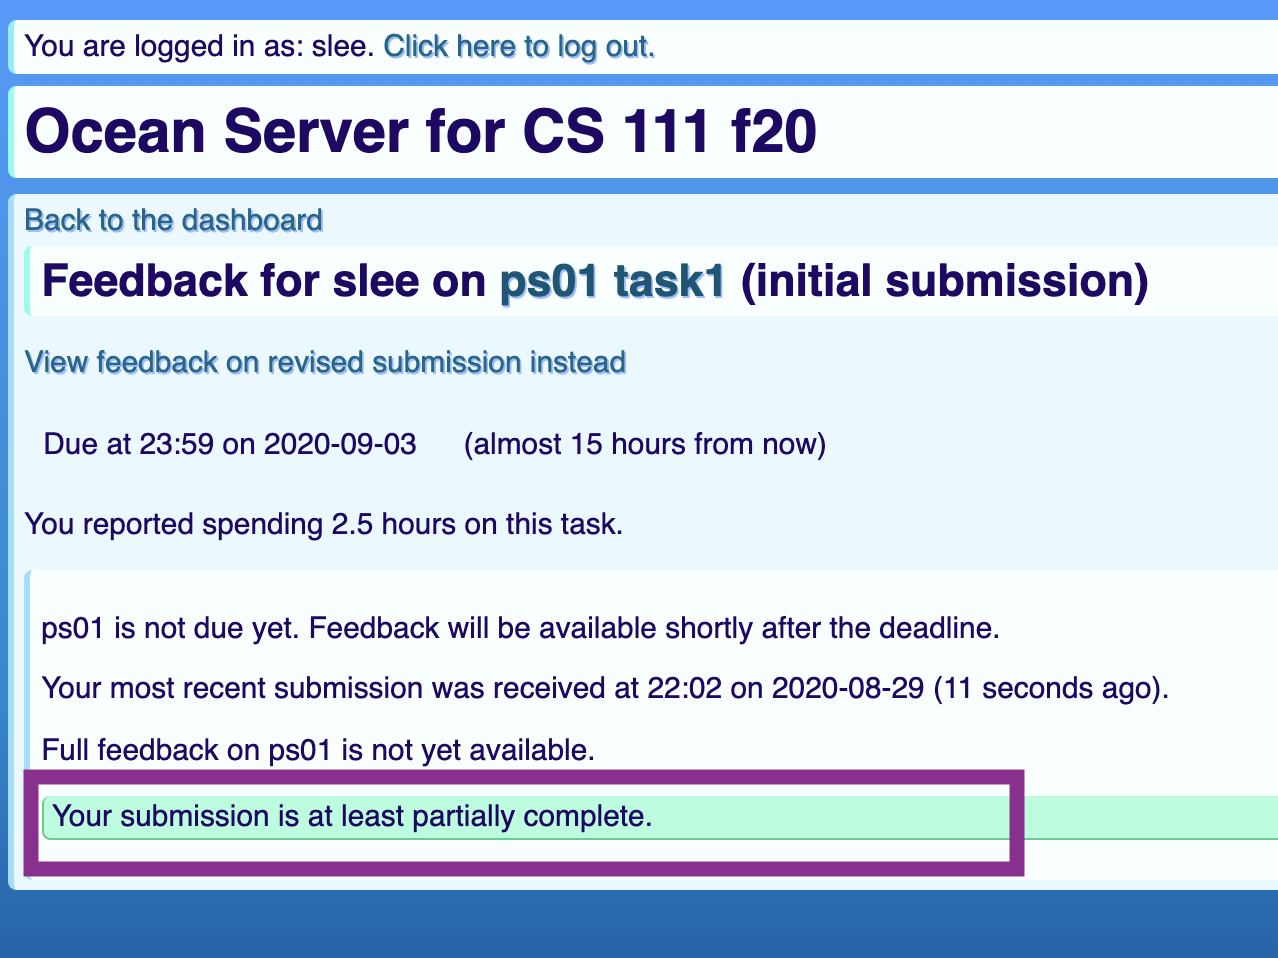 The same screen as described above, this time with a new message saying 'Your submission is at least partially complete'. This is the indicator that what you submitted is at least working at a very basic level, and you won't get more detailed feedback than that before the deadline.